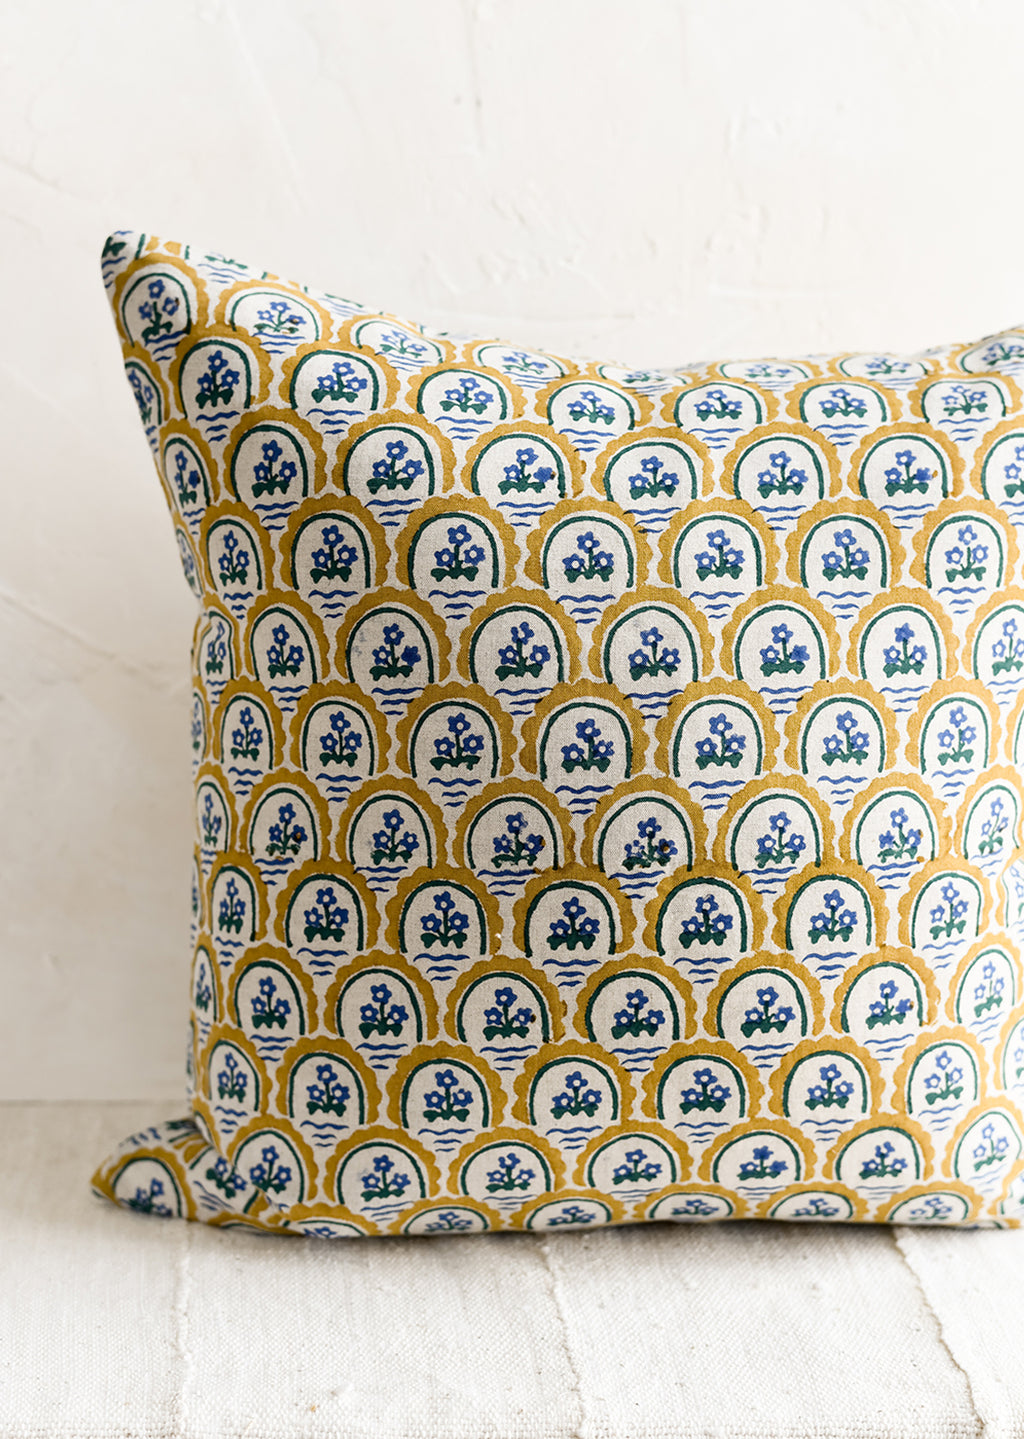 3: A block printed pillow with yellow and blue floral motif.